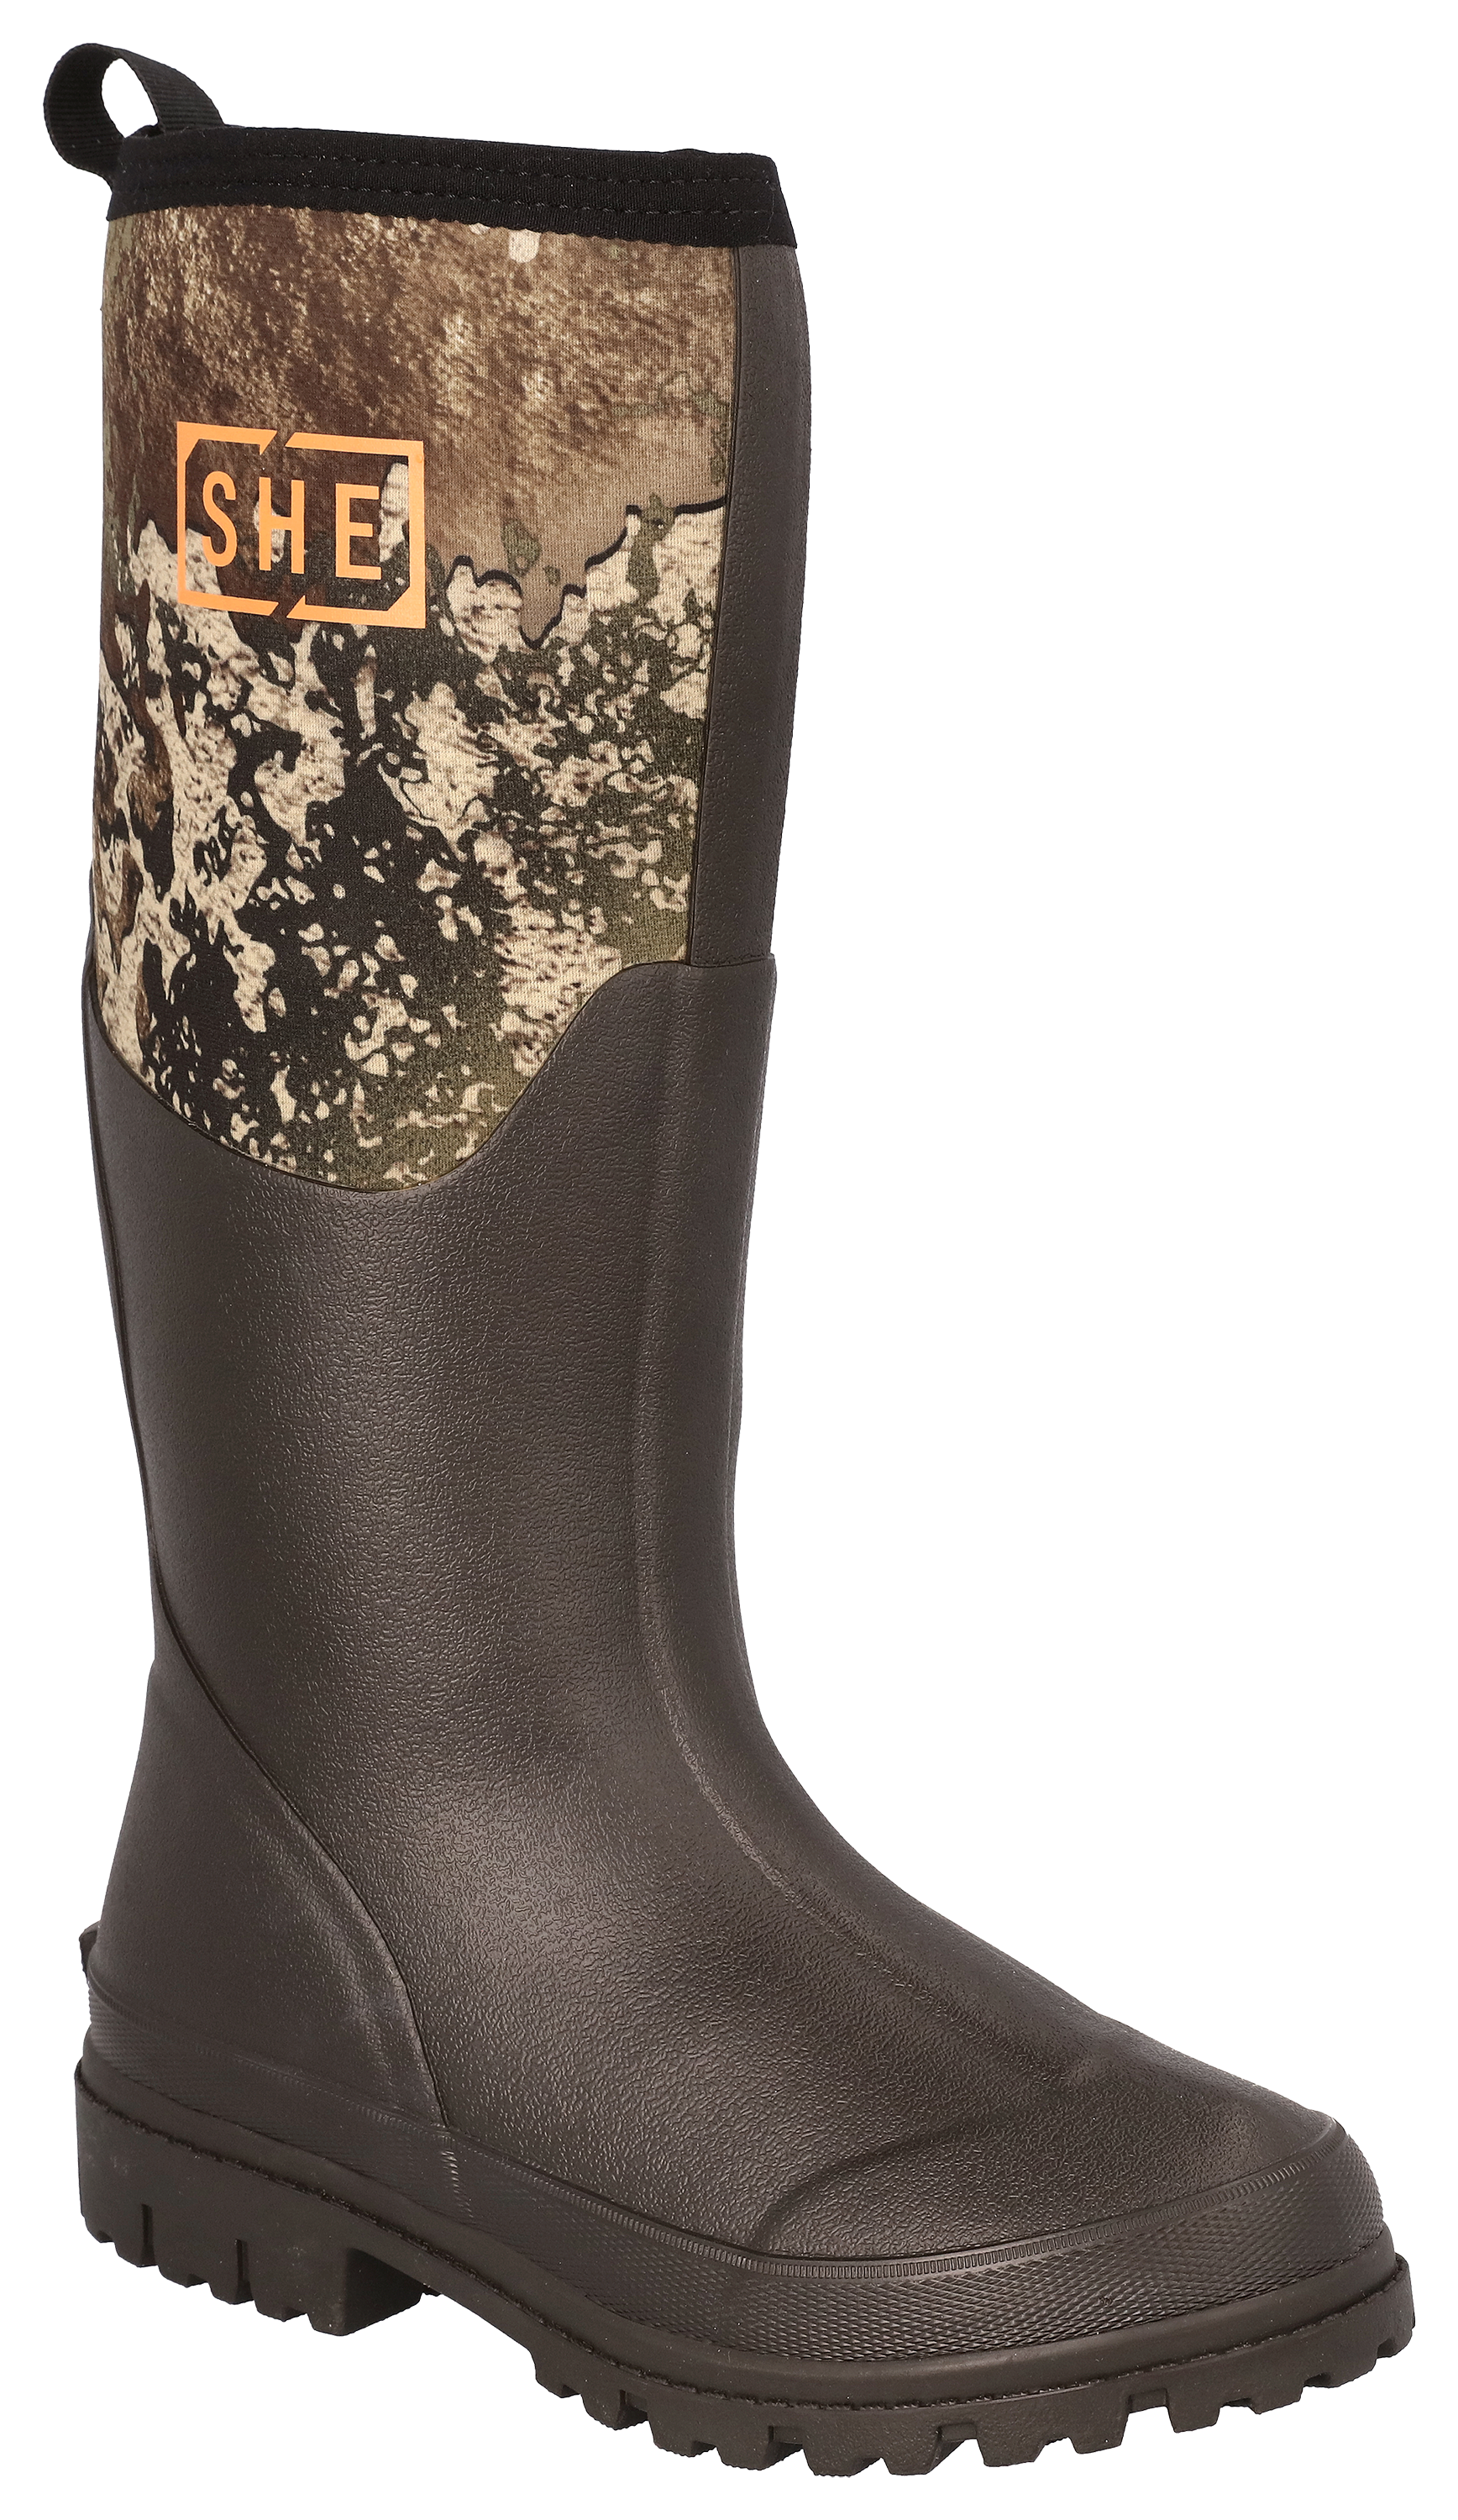 SHE Outdoor Camo Utility Waterproof Rubber Boots for Ladies | Cabela's